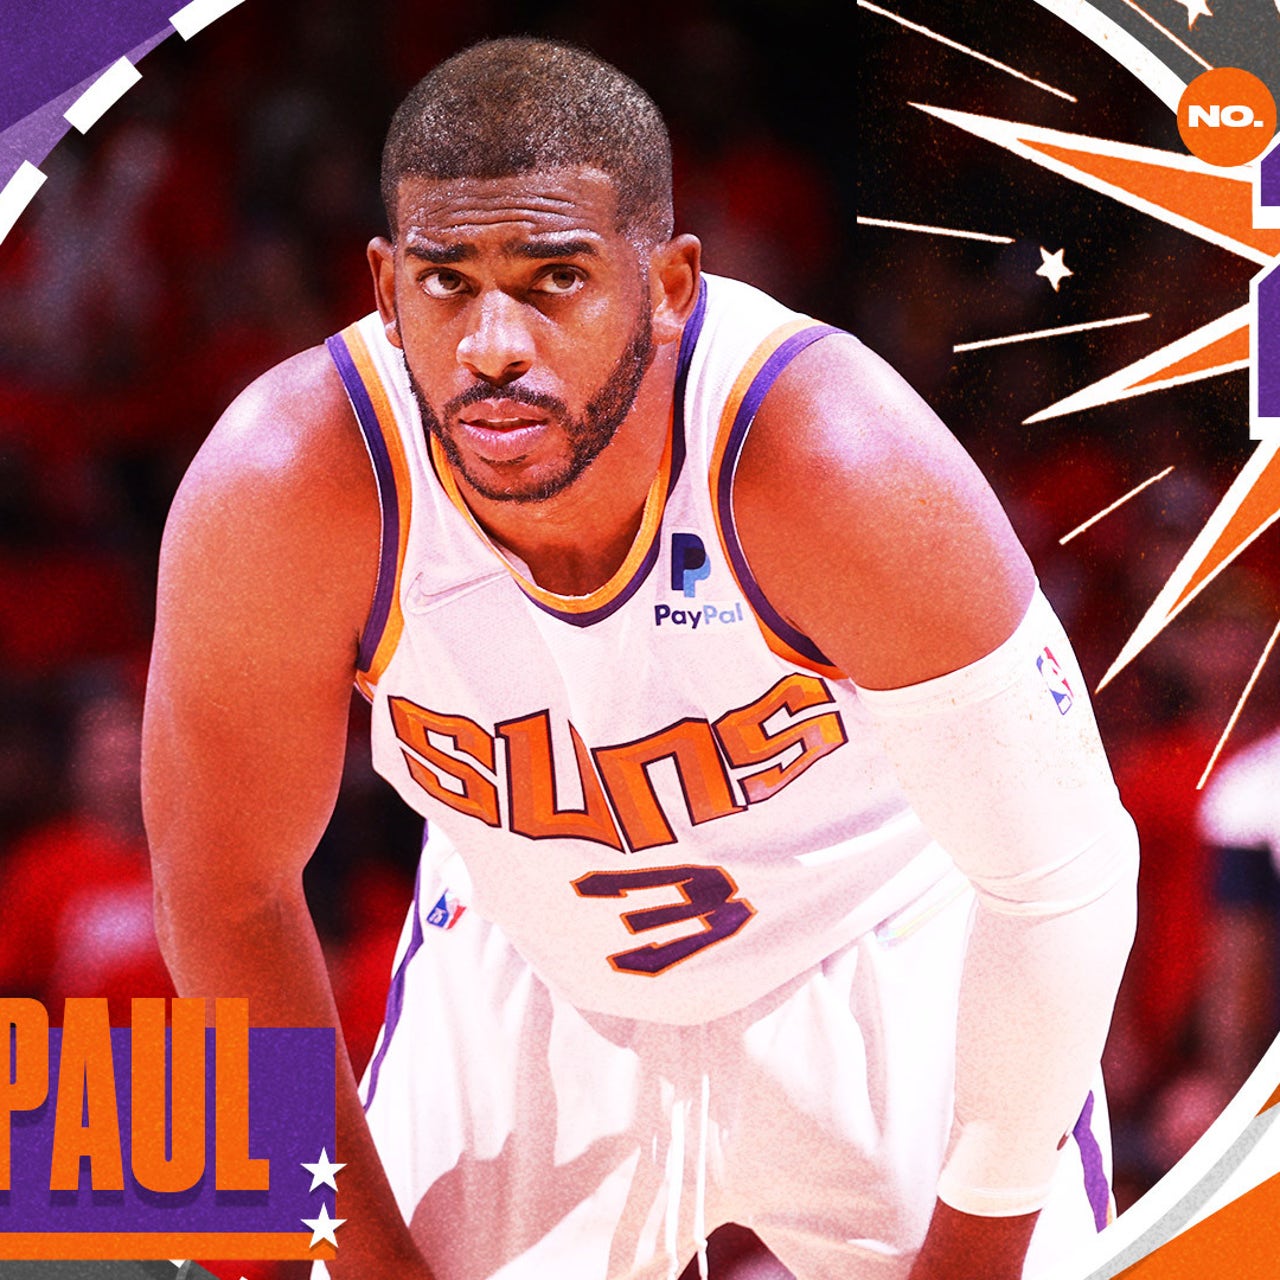 Top 50 NBA players from last 50 years: Chris Paul ranks No. 21 